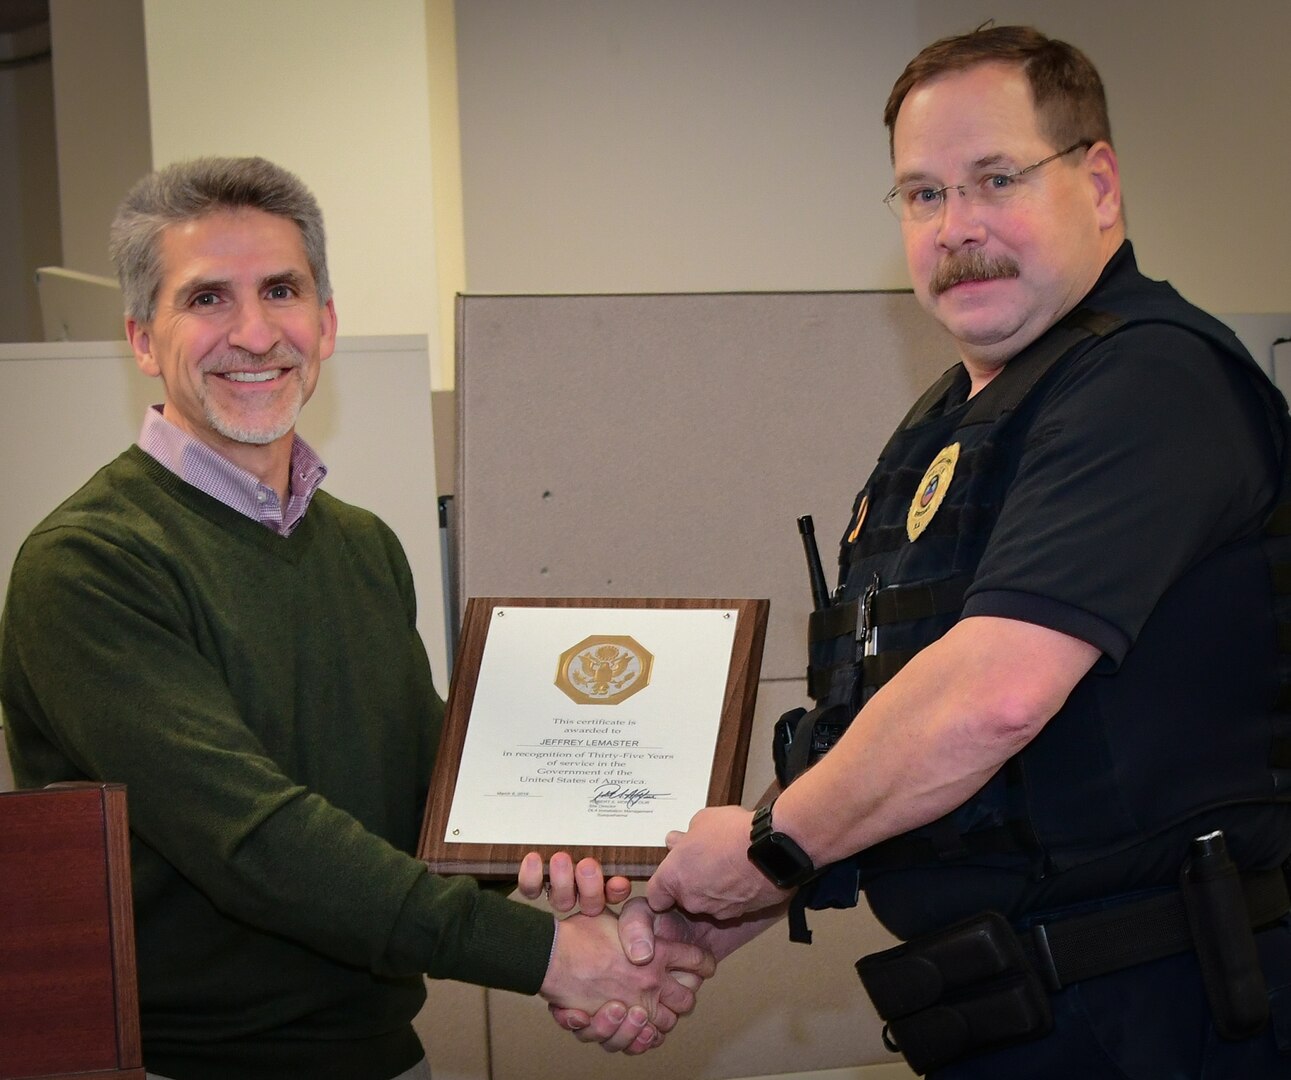 DLA Susquehanna police officer receives recognition for 35 years of service